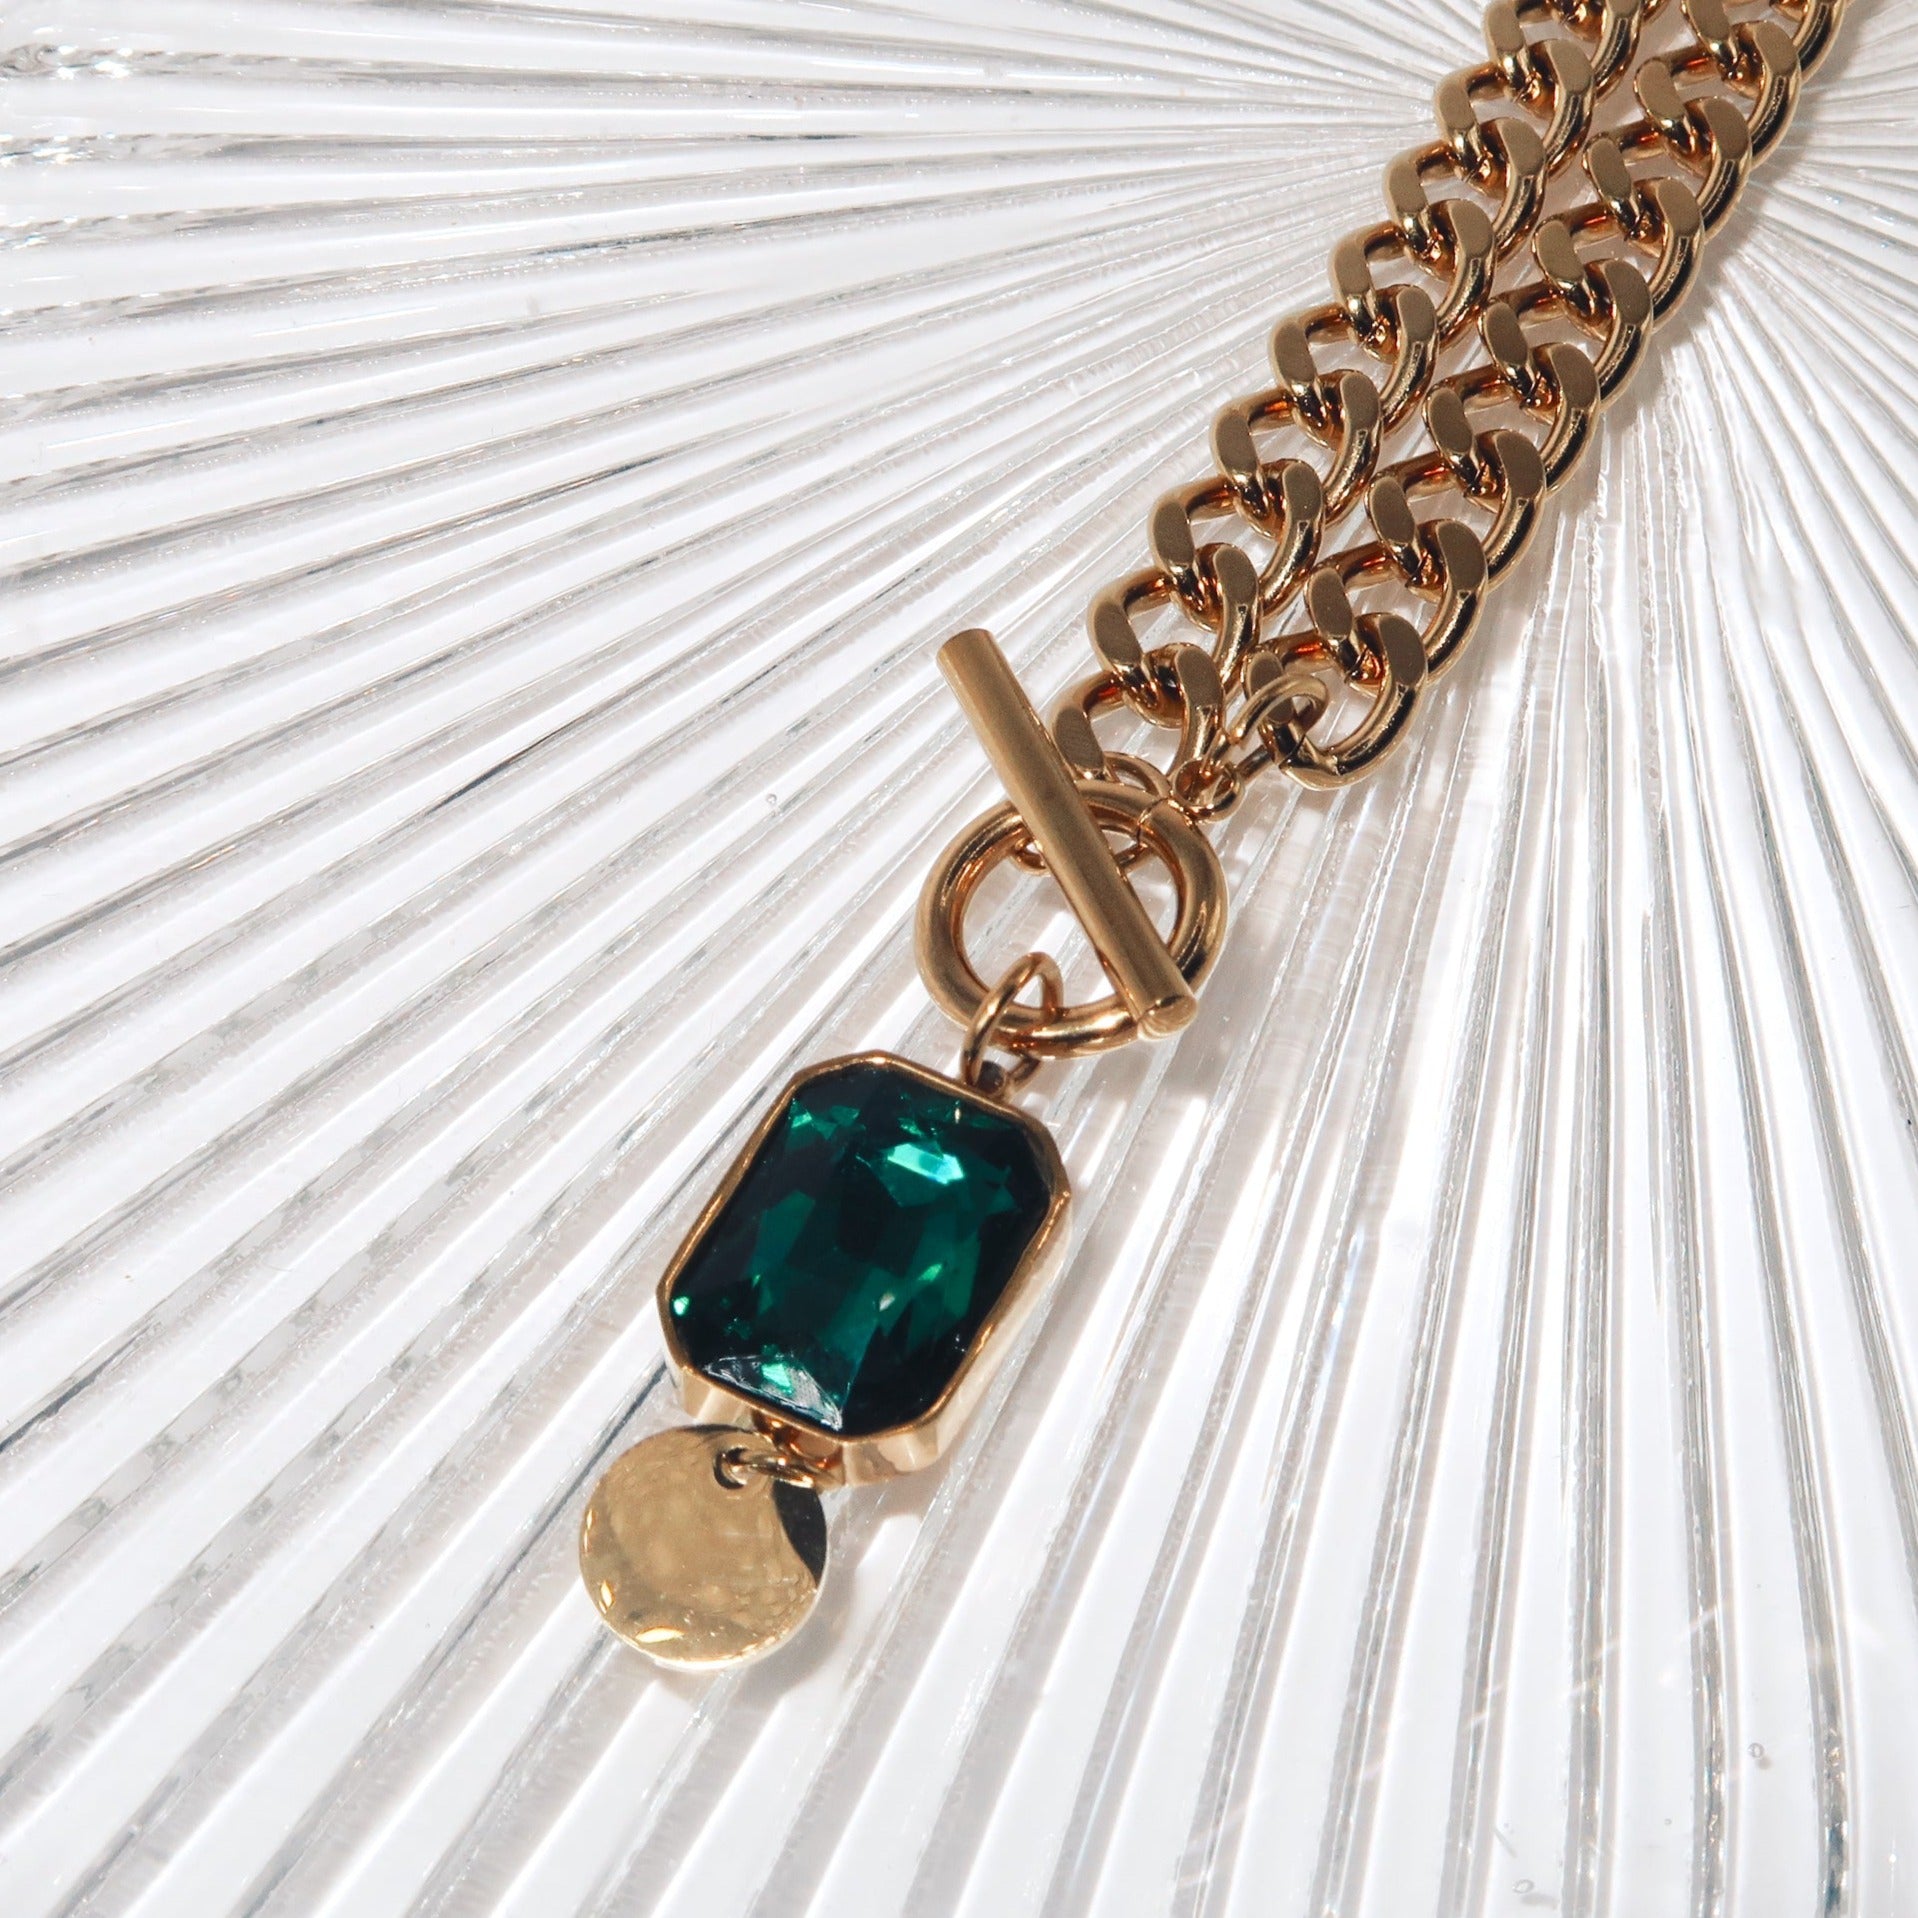 KENZ - 18K PVD Gold Plated Link Necklace with Emerald CZ Stone - Mixed Metals